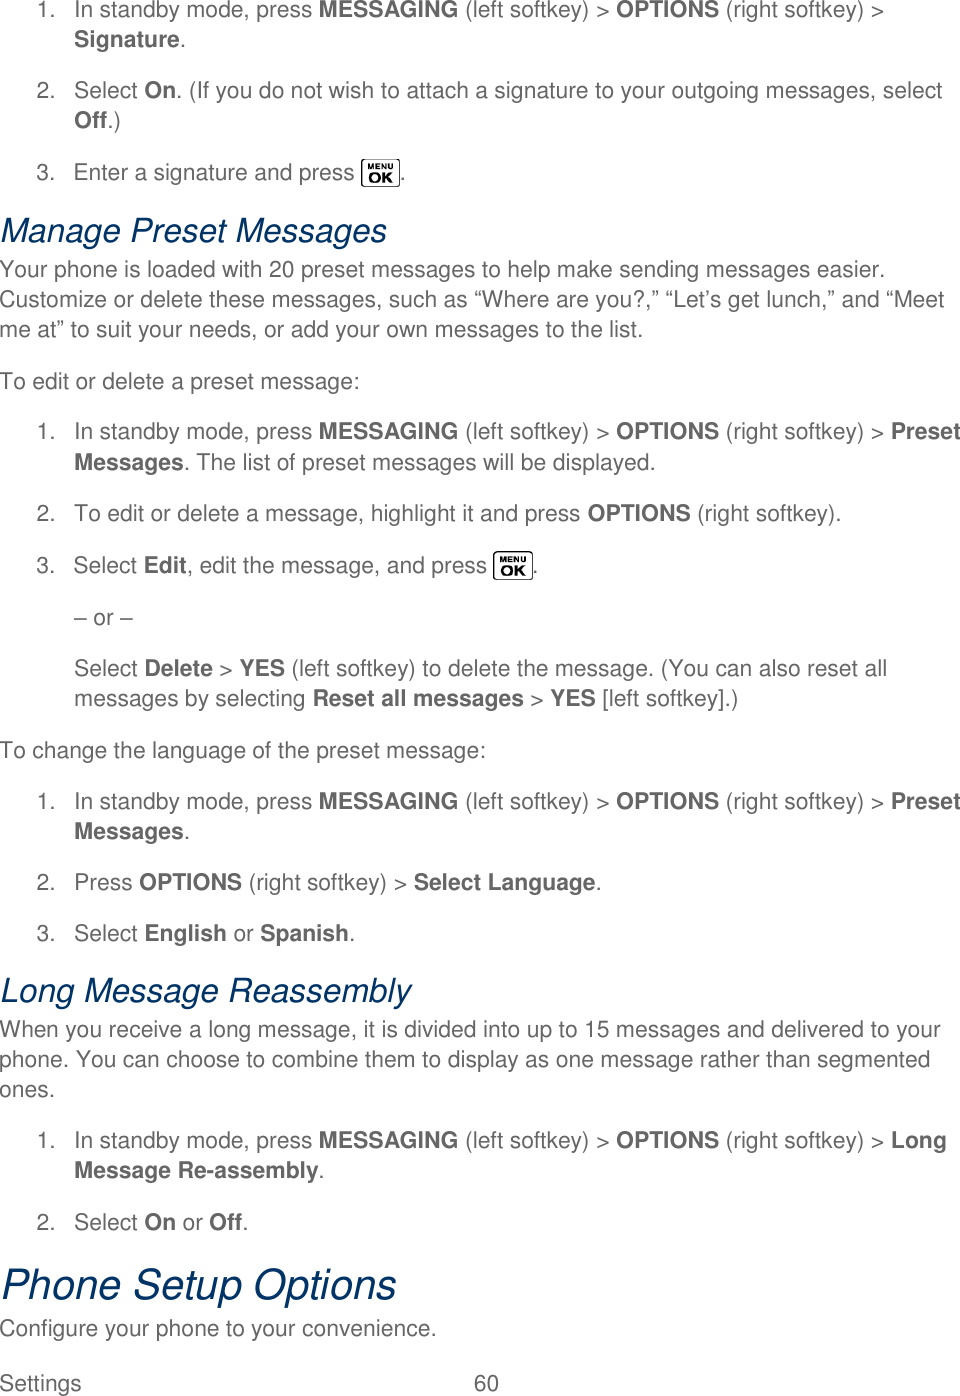  Settings  60   1.  In standby mode, press MESSAGING (left softkey) &gt; OPTIONS (right softkey) &gt; Signature. 2.  Select On. (If you do not wish to attach a signature to your outgoing messages, select Off.) 3.  Enter a signature and press  . Manage Preset Messages Your phone is loaded with 20 preset messages to help make sending messages easier. Customize or delete these messages, such as ―Where are you?,‖ ―Let‘s get lunch,‖ and ―Meet me at‖ to suit your needs, or add your own messages to the list. To edit or delete a preset message: 1.  In standby mode, press MESSAGING (left softkey) &gt; OPTIONS (right softkey) &gt; Preset Messages. The list of preset messages will be displayed. 2.  To edit or delete a message, highlight it and press OPTIONS (right softkey). 3.  Select Edit, edit the message, and press  . – or – Select Delete &gt; YES (left softkey) to delete the message. (You can also reset all messages by selecting Reset all messages &gt; YES [left softkey].) To change the language of the preset message:  1.  In standby mode, press MESSAGING (left softkey) &gt; OPTIONS (right softkey) &gt; Preset Messages. 2.  Press OPTIONS (right softkey) &gt; Select Language. 3.  Select English or Spanish. Long Message Reassembly When you receive a long message, it is divided into up to 15 messages and delivered to your phone. You can choose to combine them to display as one message rather than segmented ones. 1.  In standby mode, press MESSAGING (left softkey) &gt; OPTIONS (right softkey) &gt; Long Message Re-assembly. 2.  Select On or Off. Phone Setup Options Configure your phone to your convenience. 